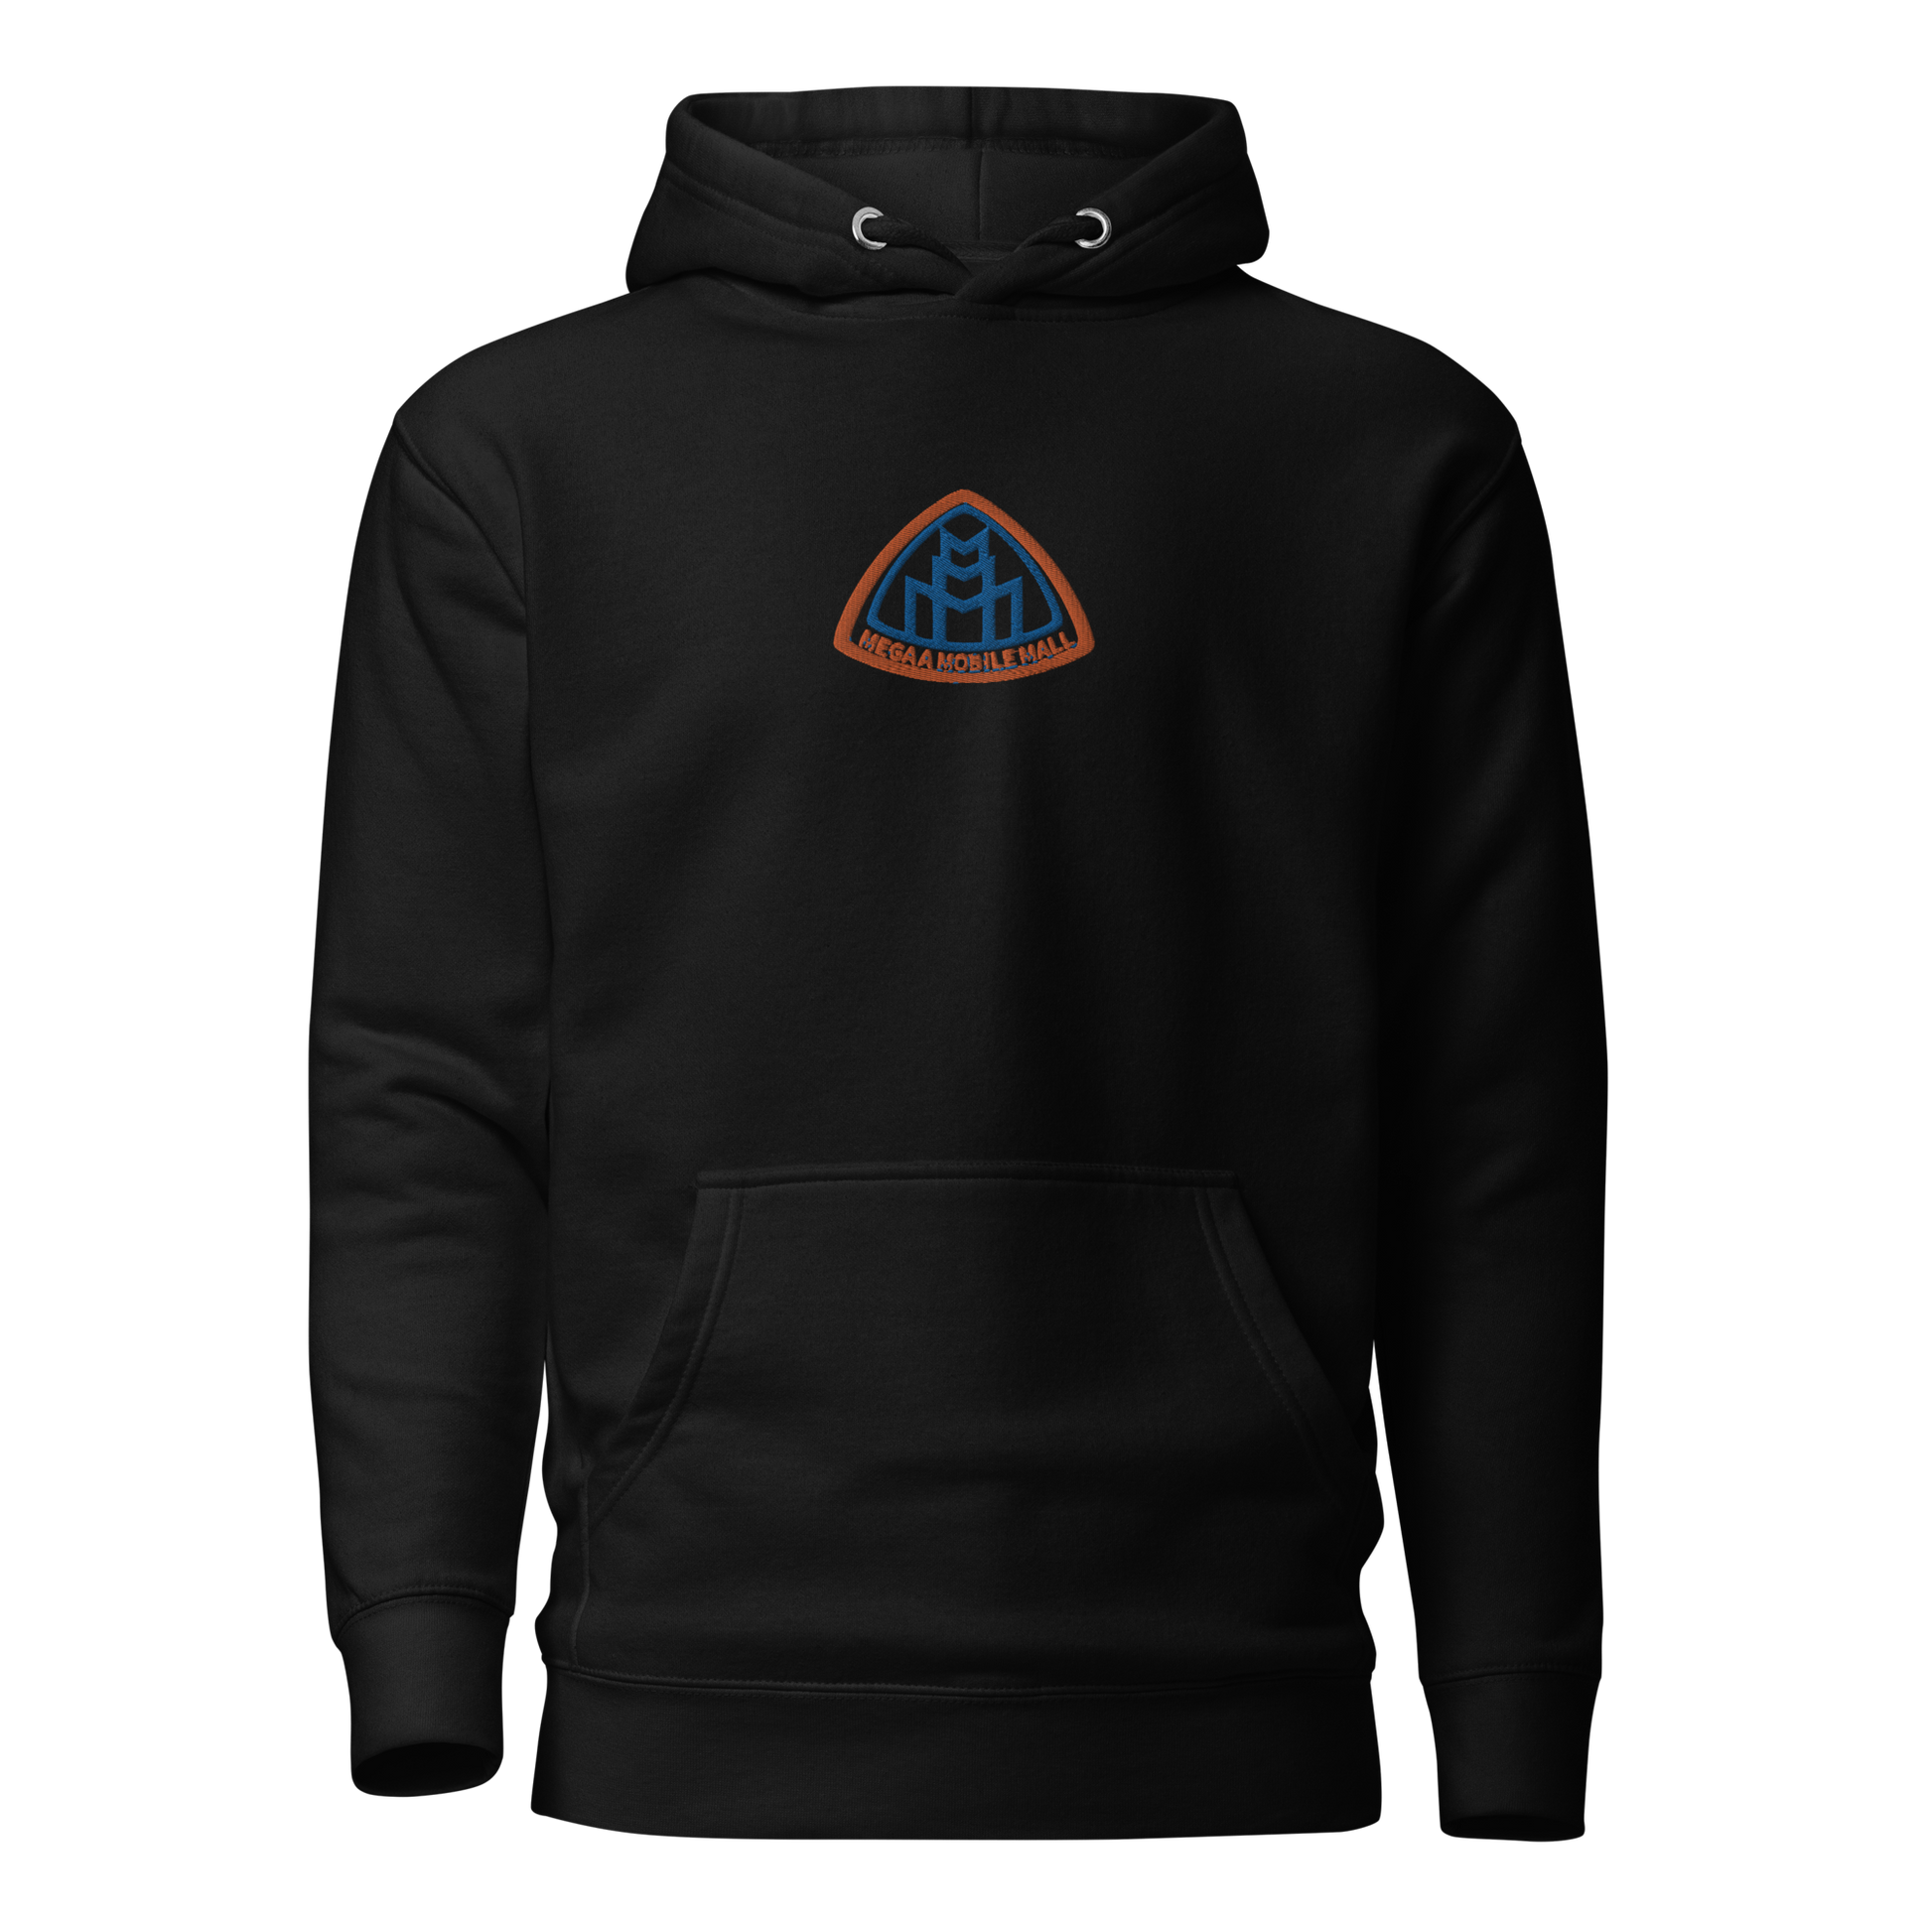 new york colorway megaamobilemall logo stitched black hoodie